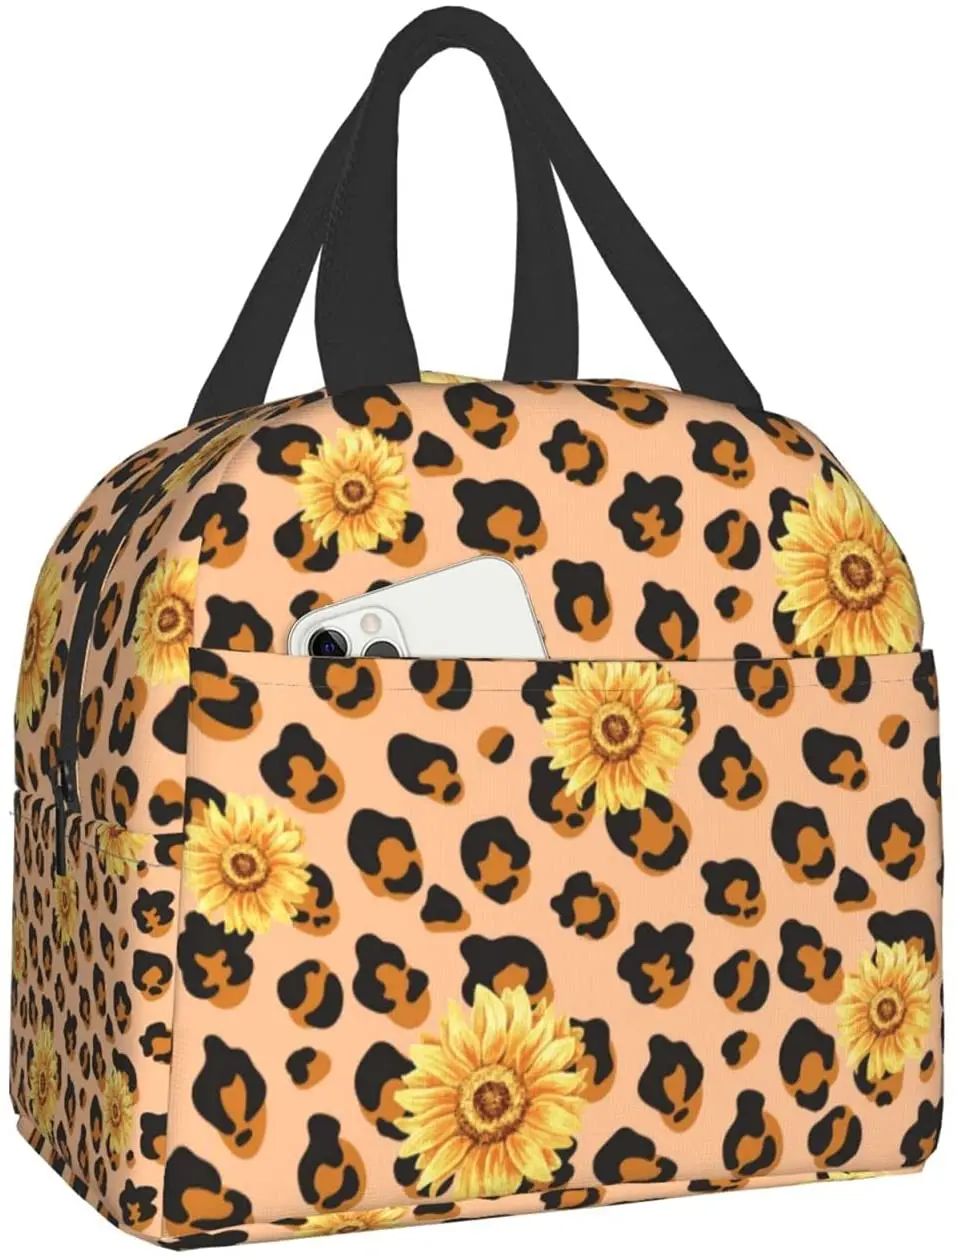 

Leopard Sunflower Lunch Bag Oxford Cloth Insulated Reusable Lunch Box Water-Resistant Leakproof Cooler Containers Organizer